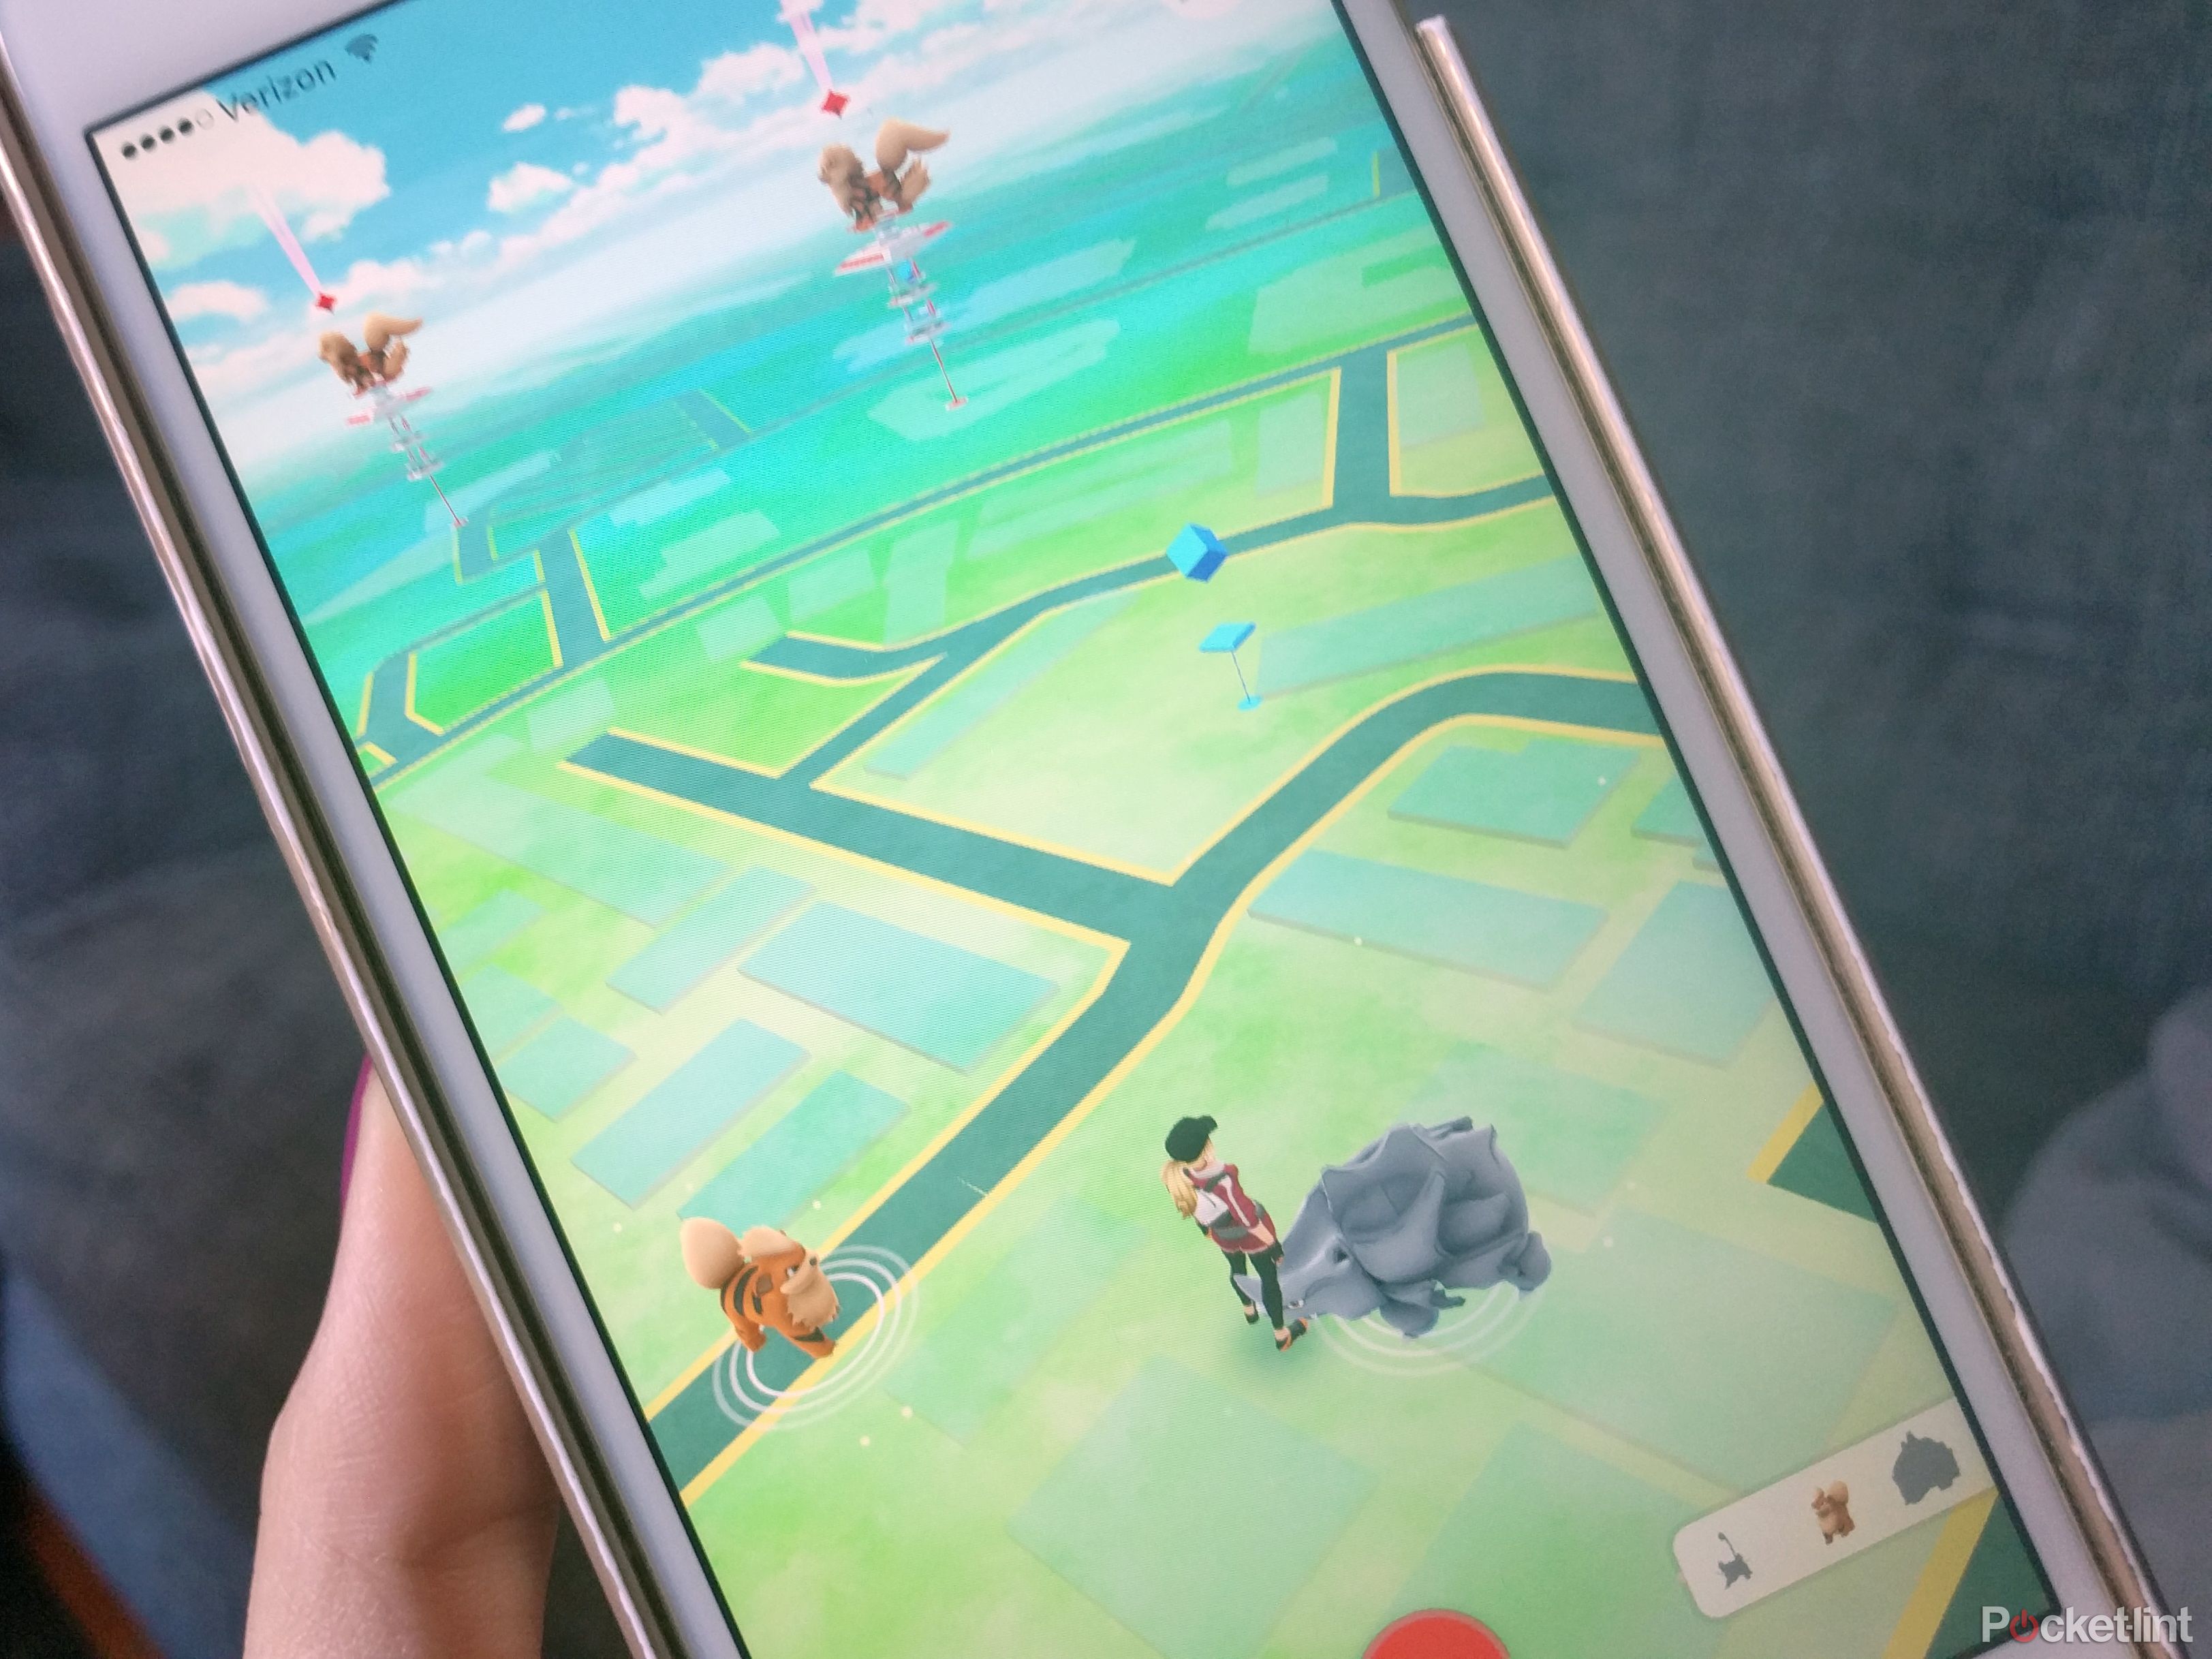 apple wants to invest in augmented reality after pokemon go success image 1